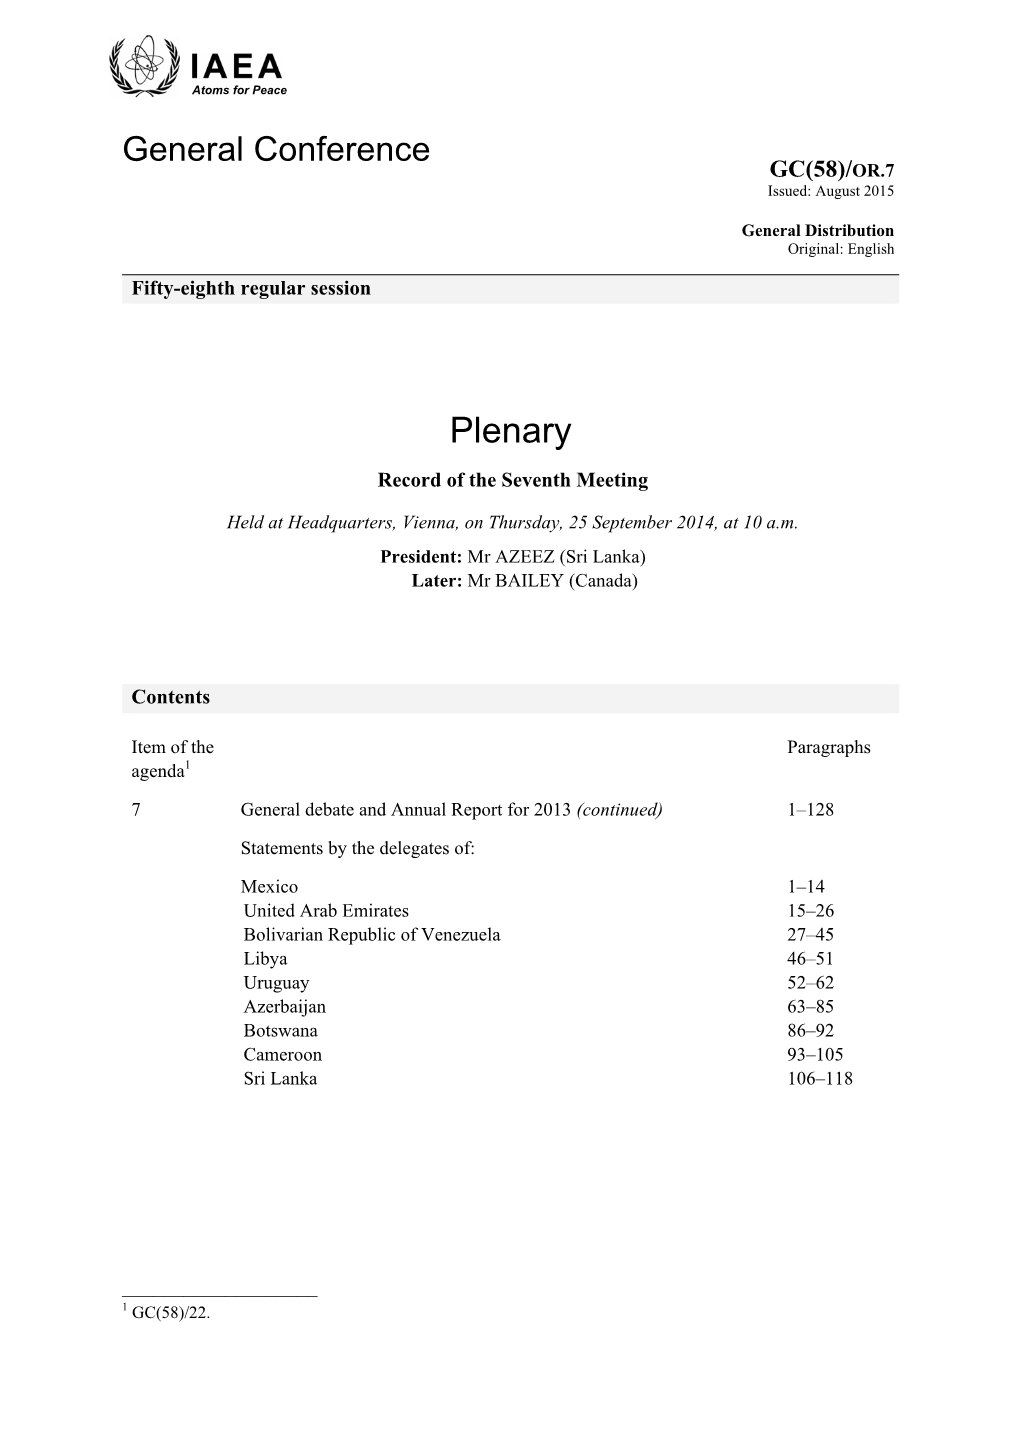 Plenary Record of the Seventh Meeting